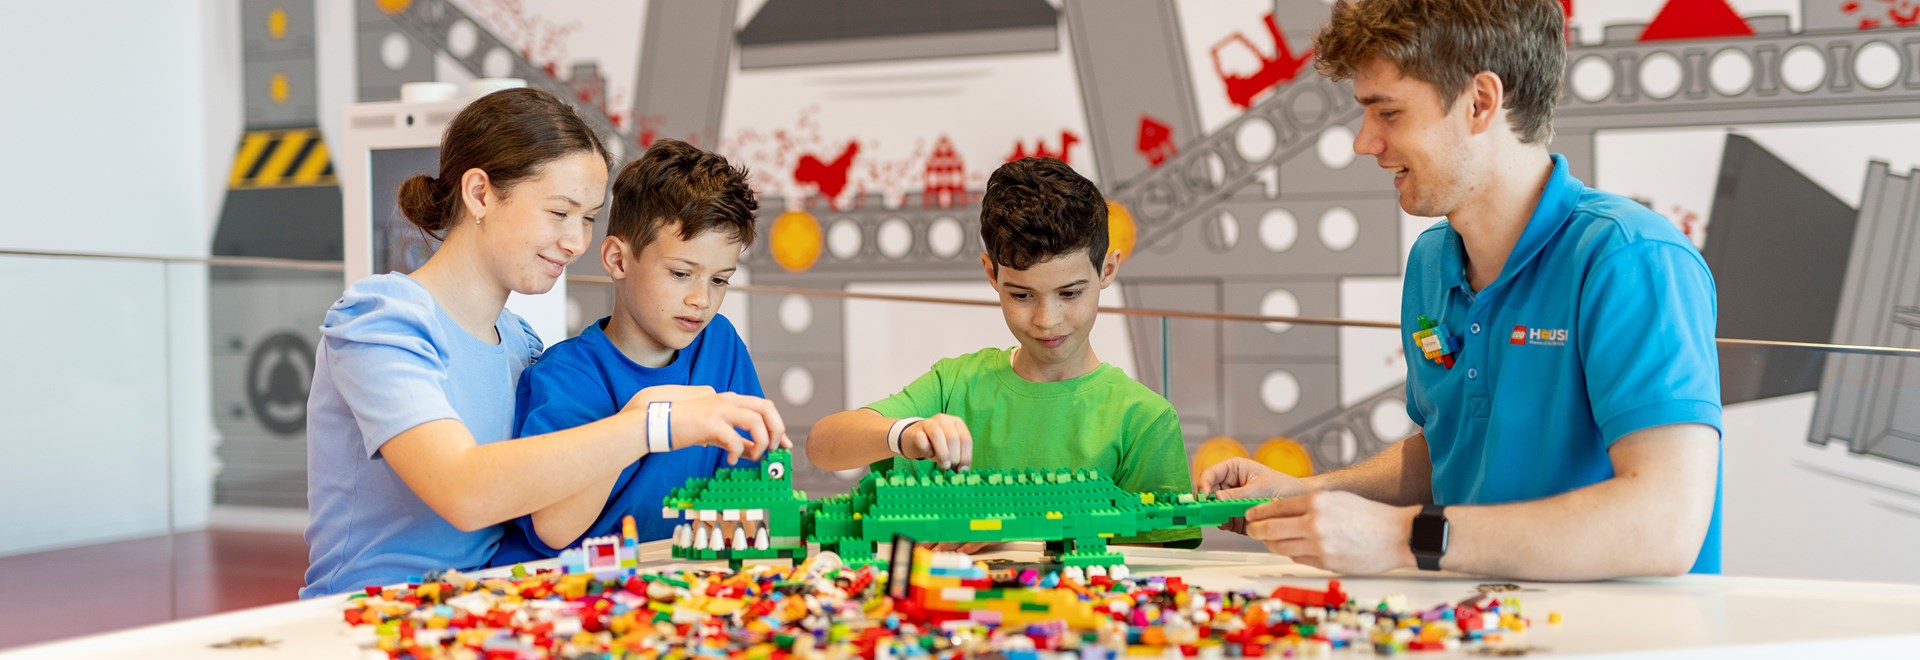 Activities and events in LEGO House